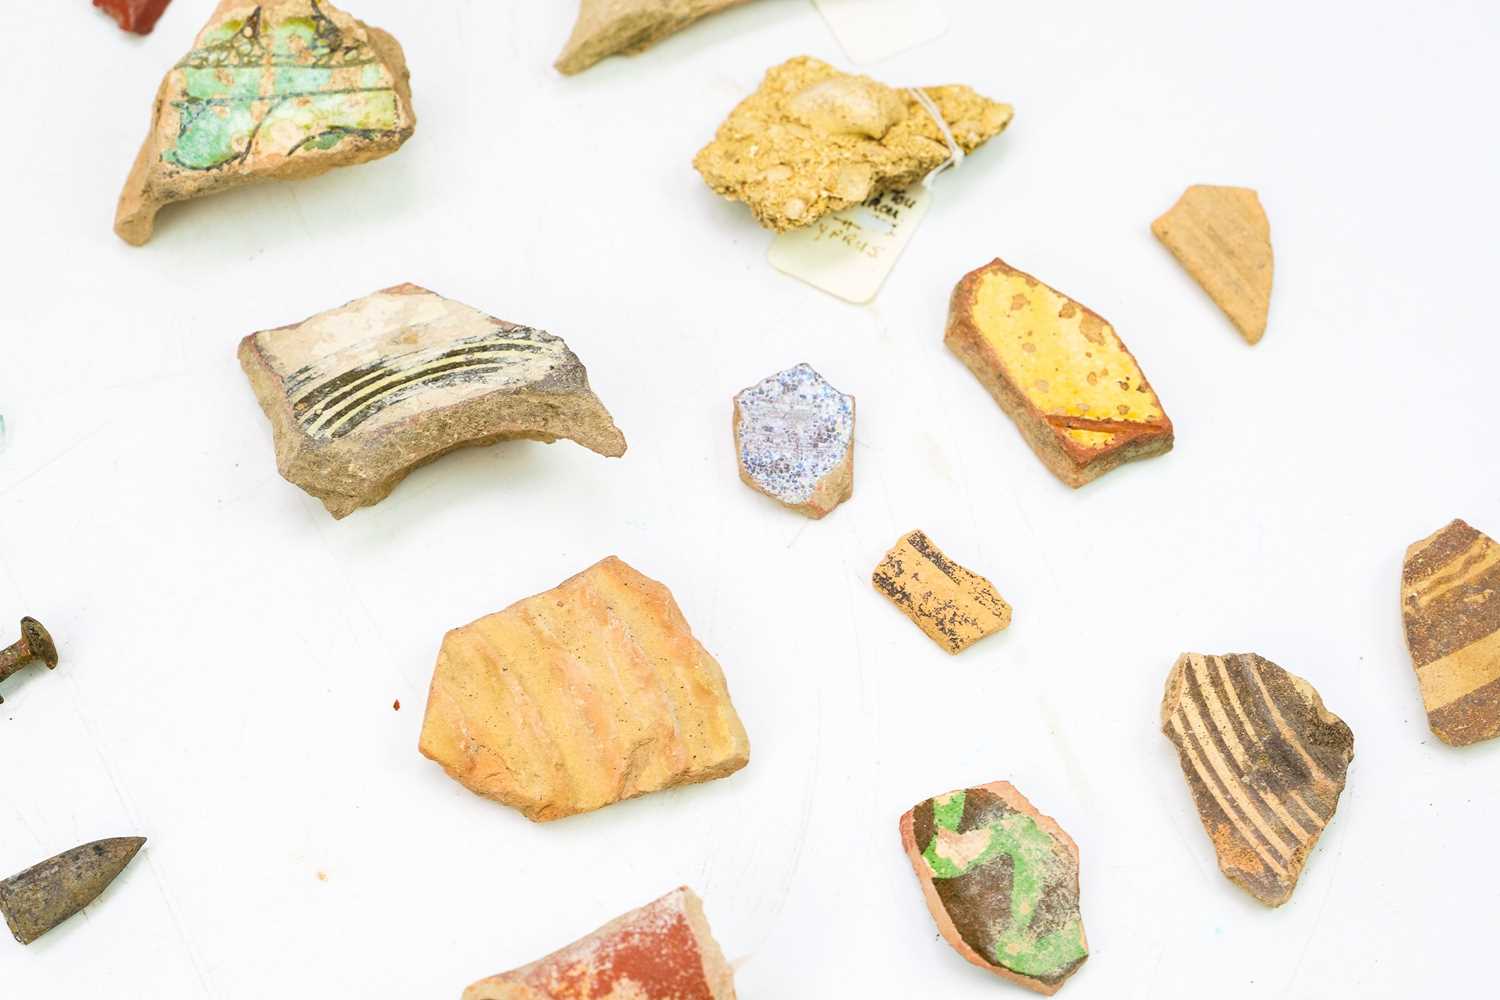 A group of Cypriot pottery shards and glass fragments. - Image 2 of 3